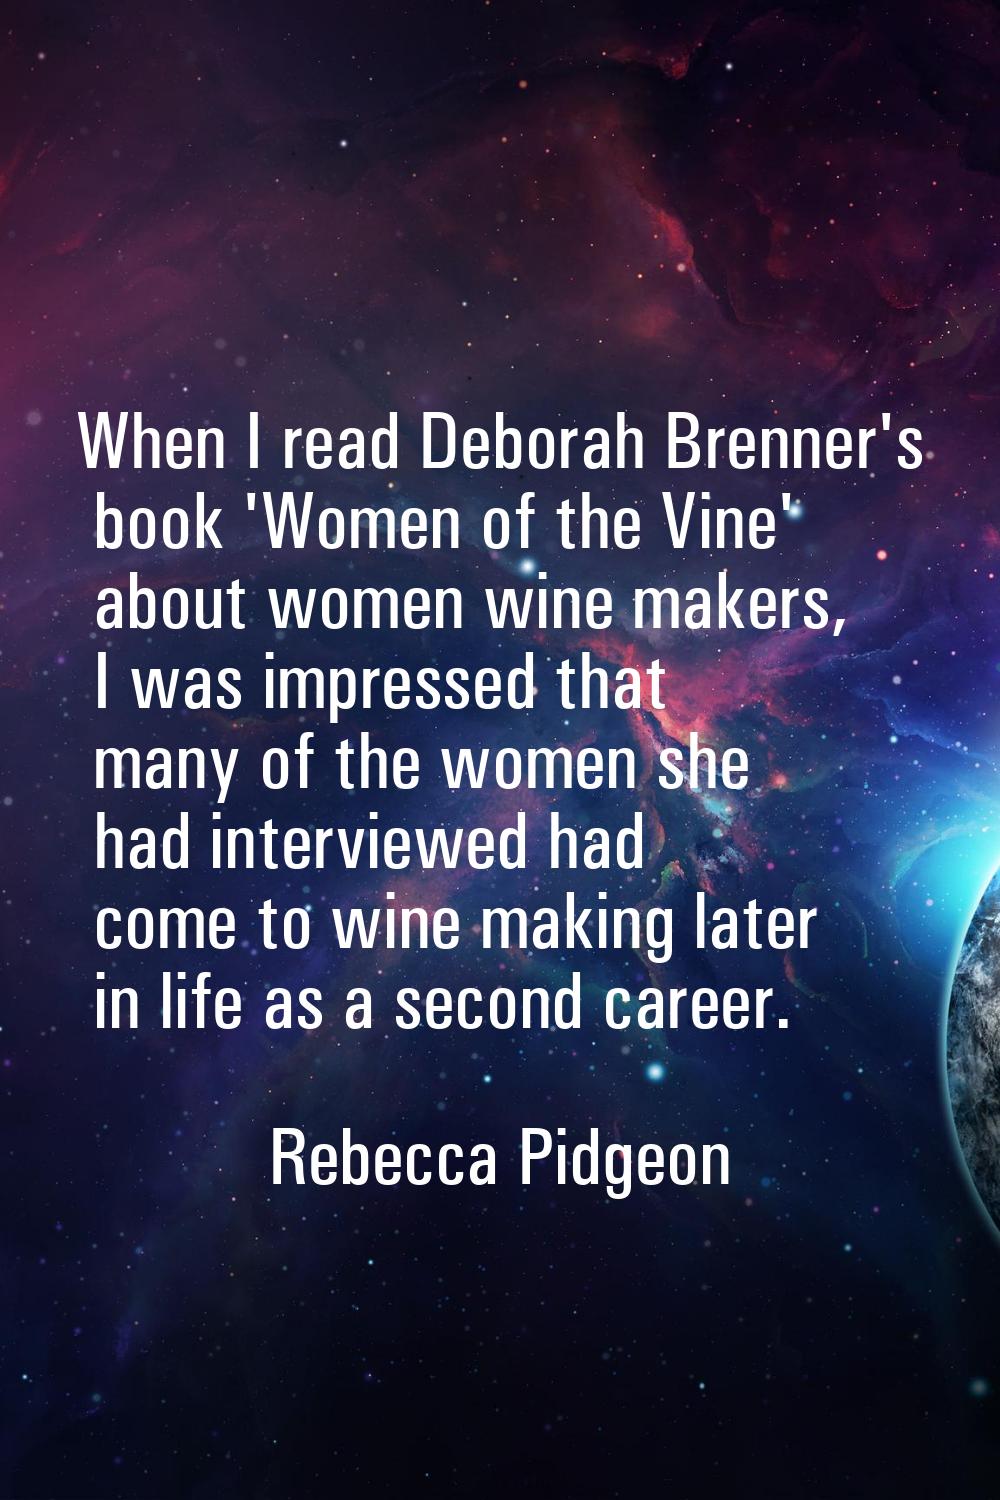 When I read Deborah Brenner's book 'Women of the Vine' about women wine makers, I was impressed tha